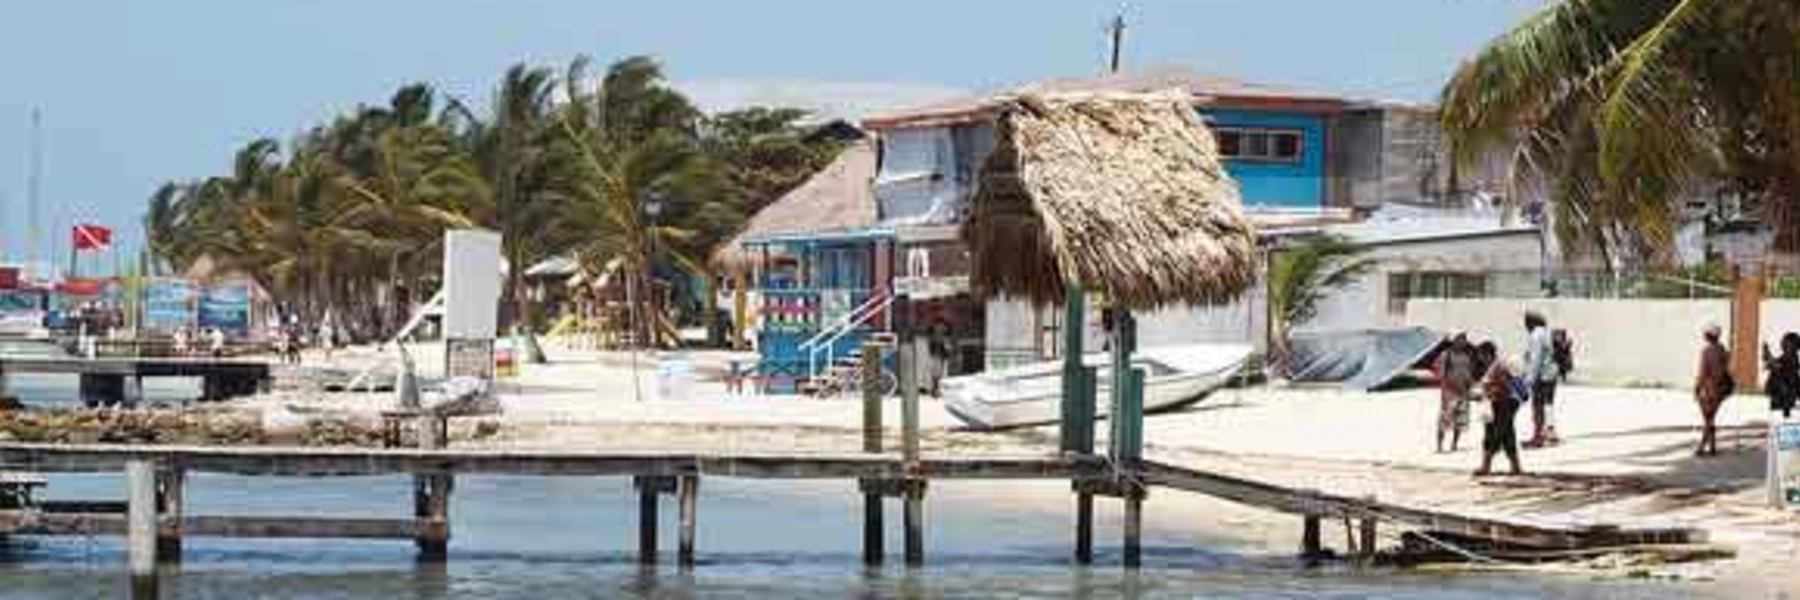 Ambergris-Caye-Belize, Tropical Island, Live in paradise